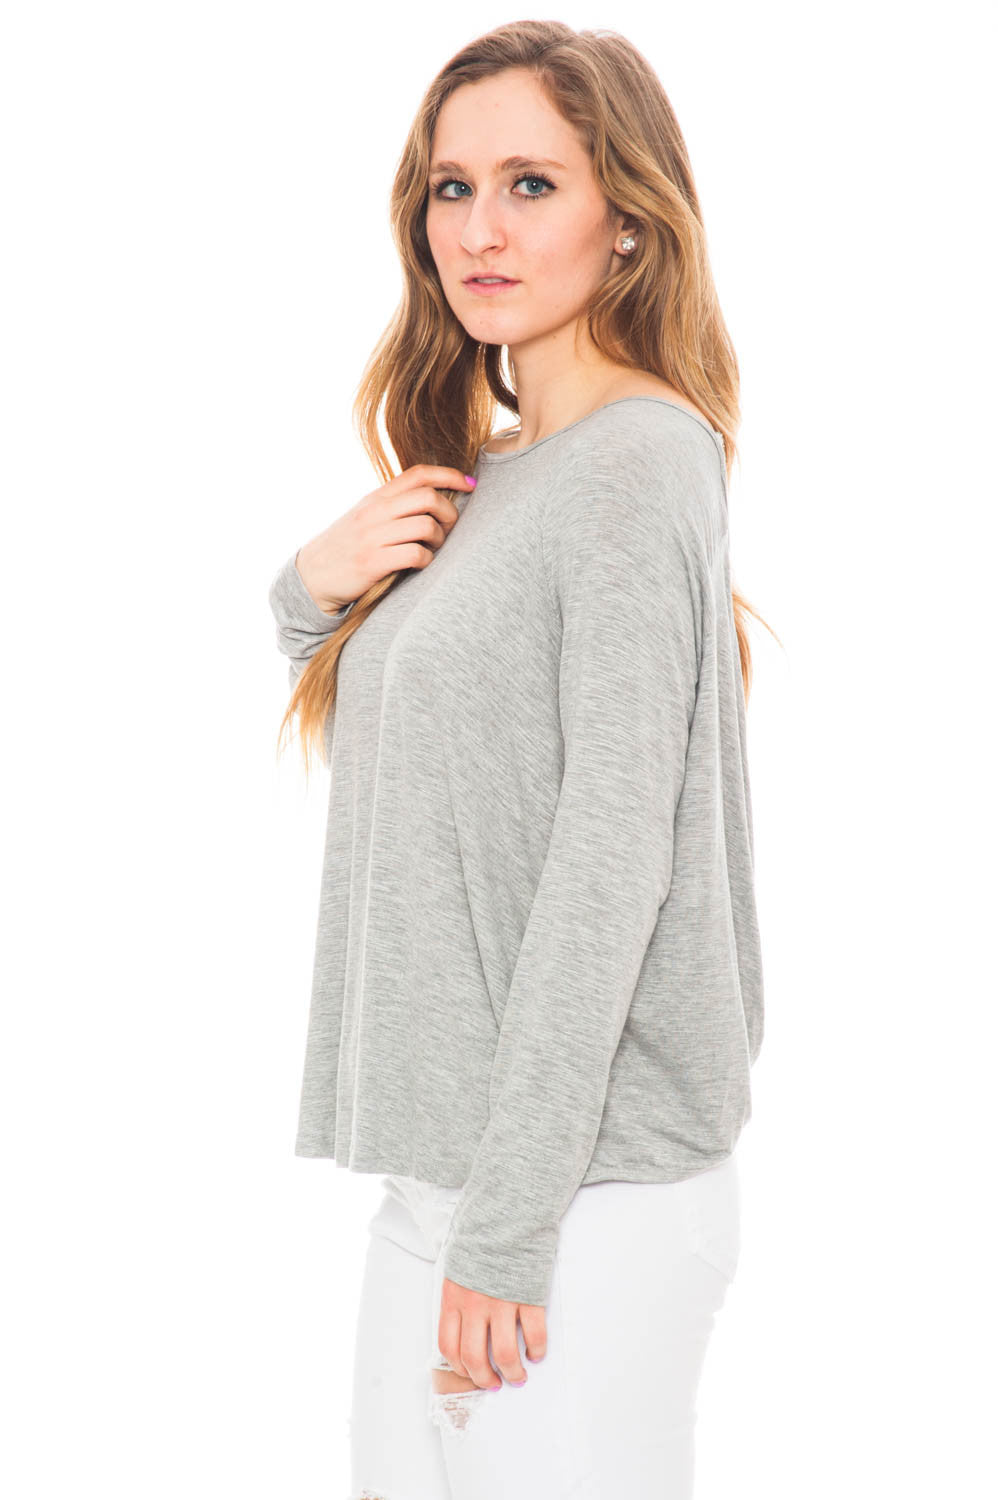 Shirt - Long Sleeve Top with an Open Back